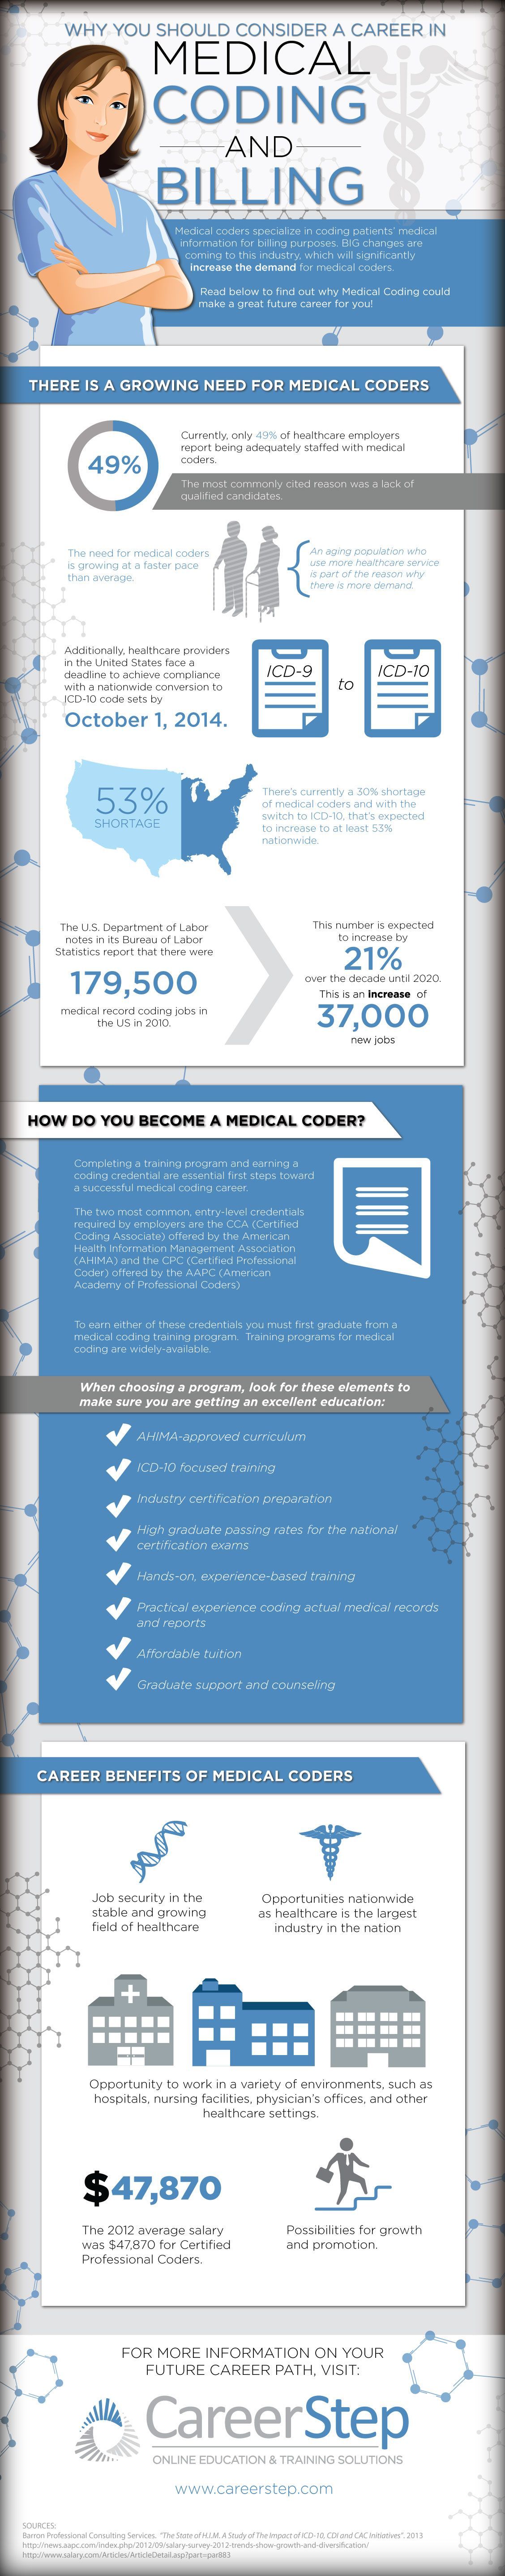 State of the Medical Coding